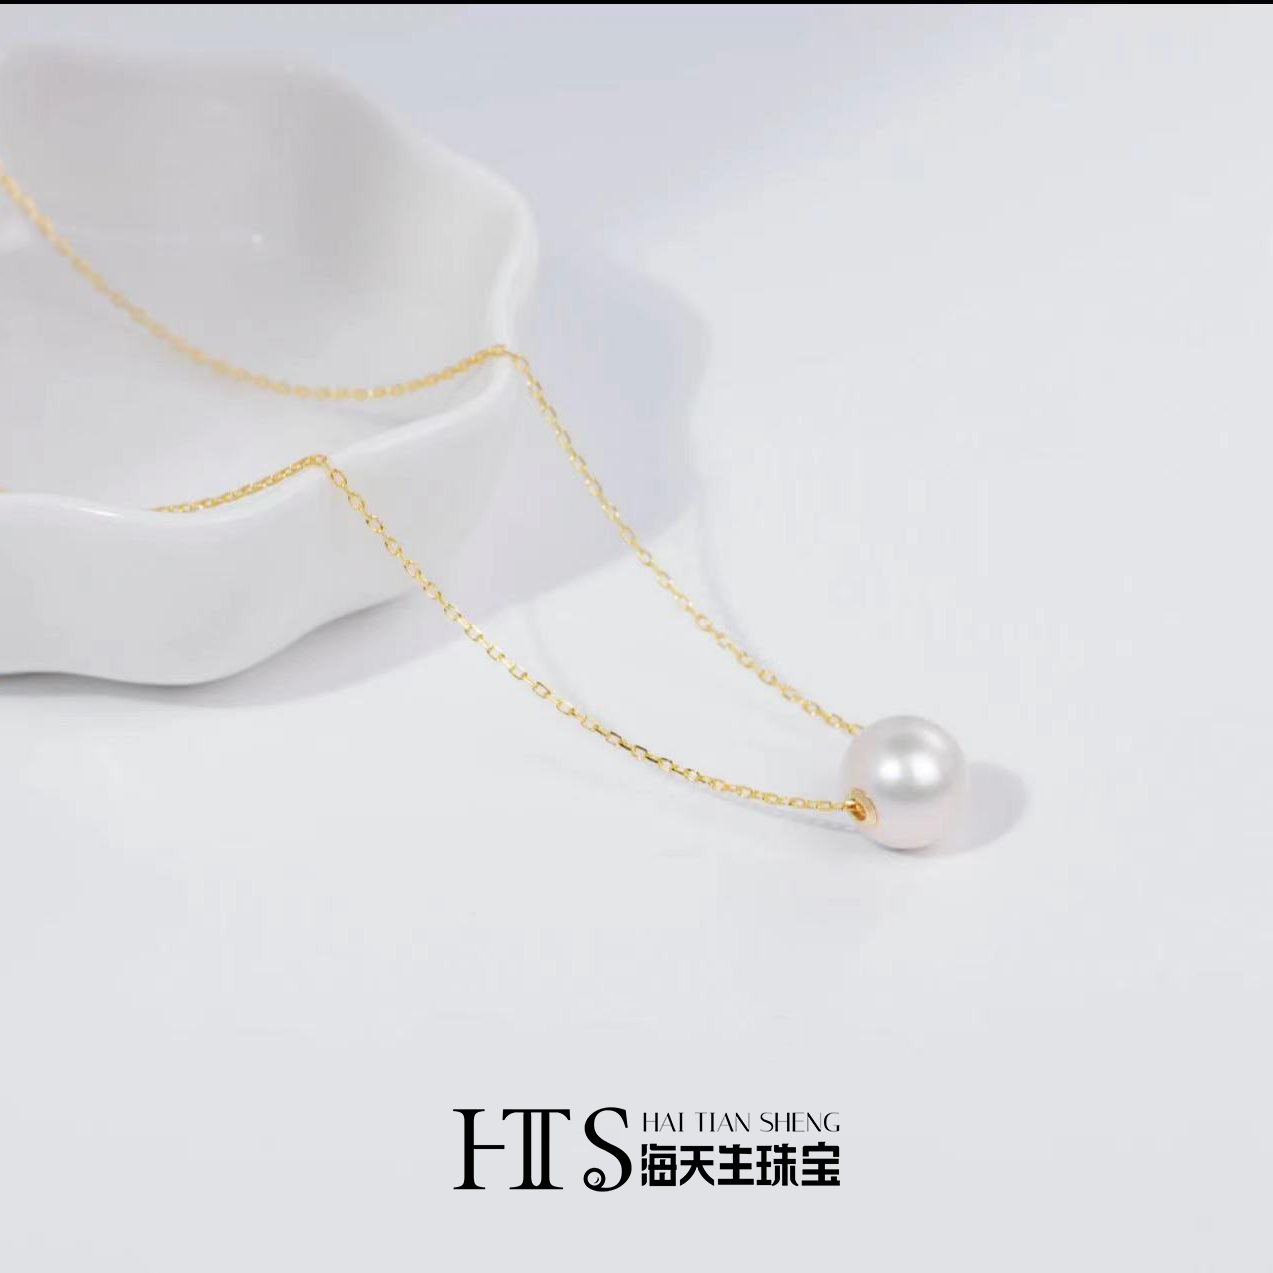 Haitiansheng new Korean version simple diy clavicle sterling silver natural pearl ins pendant necklace jewelry gift authentic